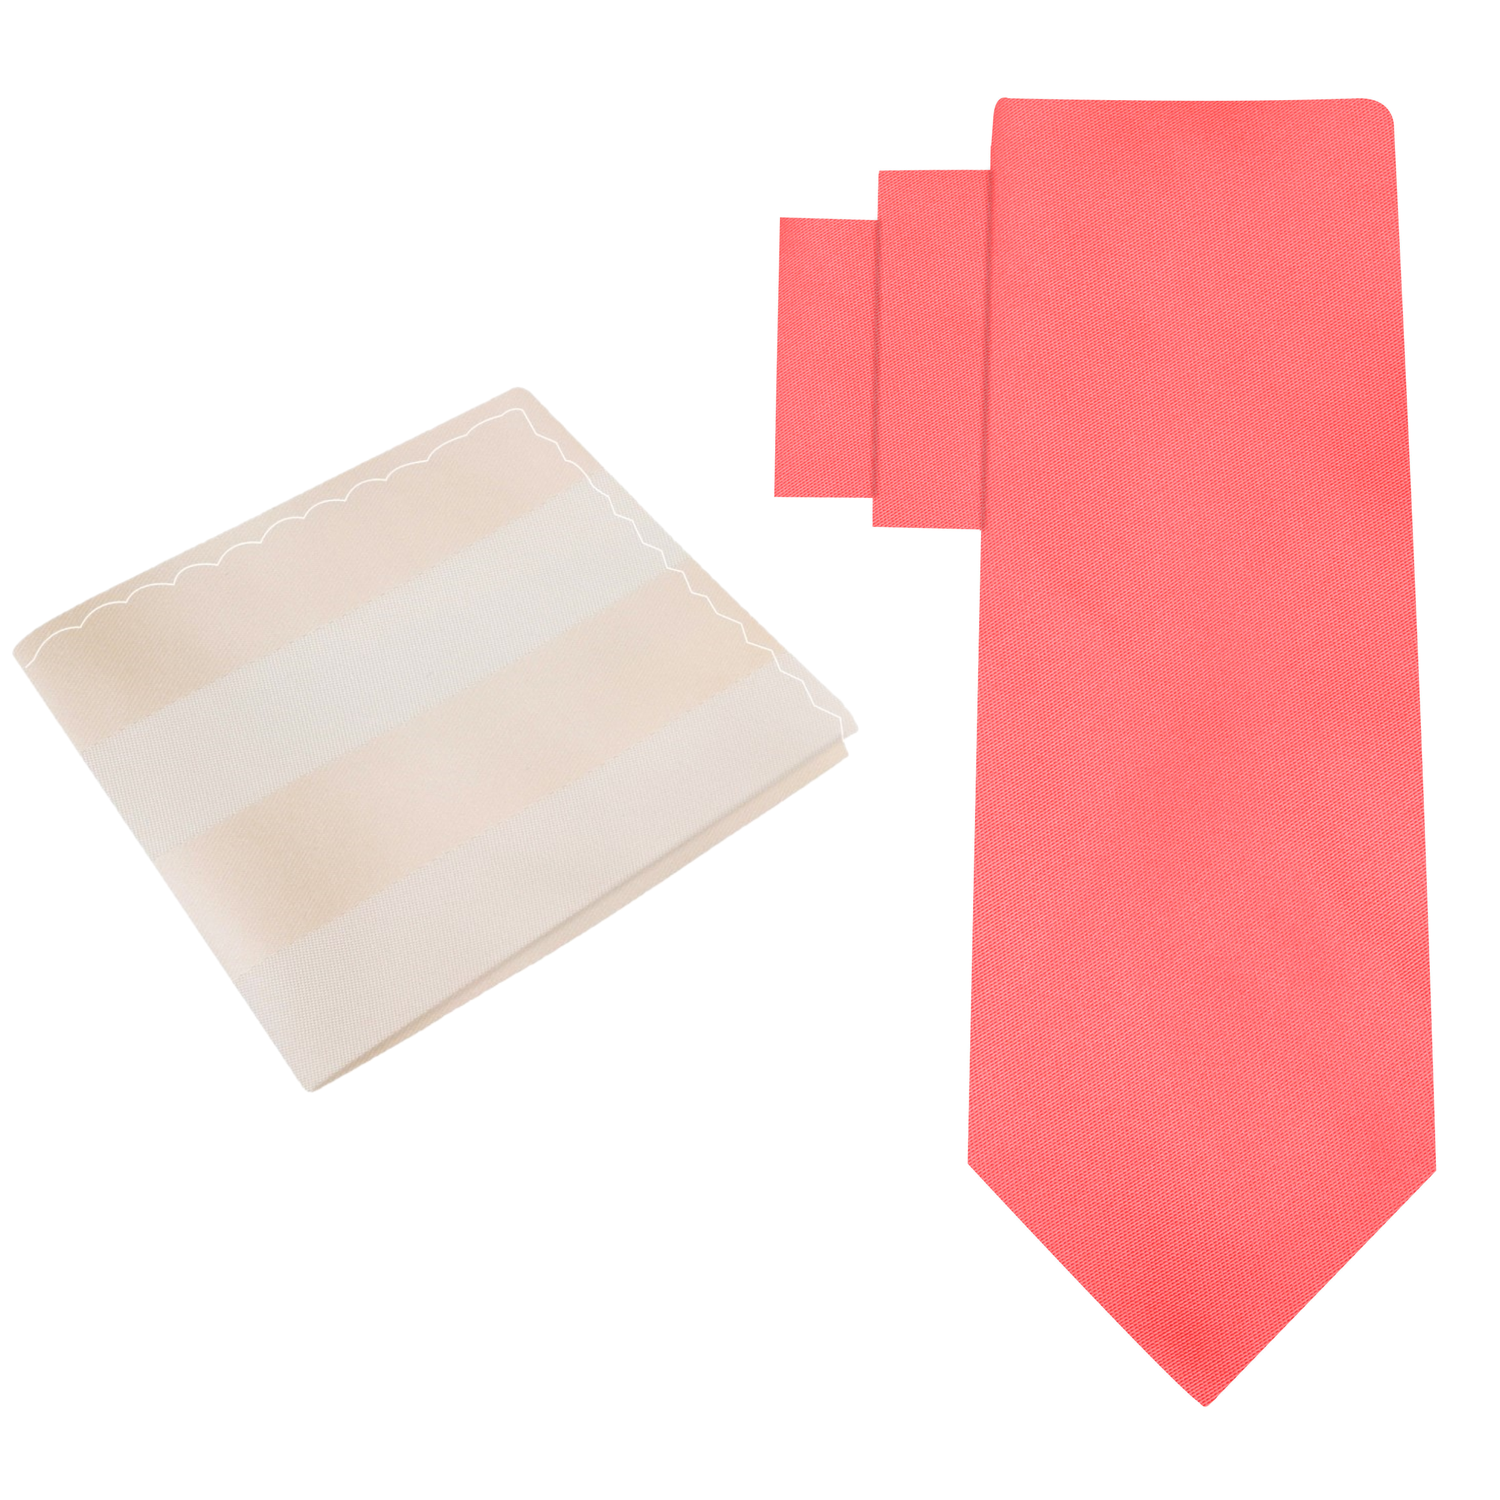 Alt view: Solid Coral Necktie with Golden Pearl Stripe Pocket Square